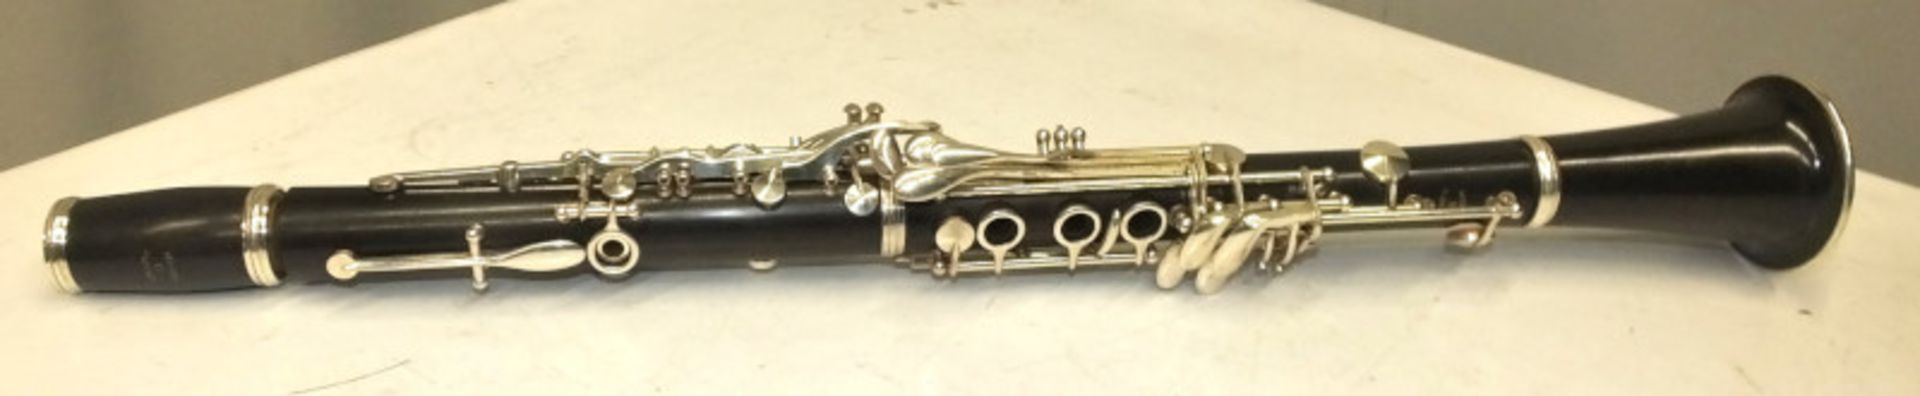 Howarth S2 Clarinet in case - Serial Number - 2228. - Image 14 of 17